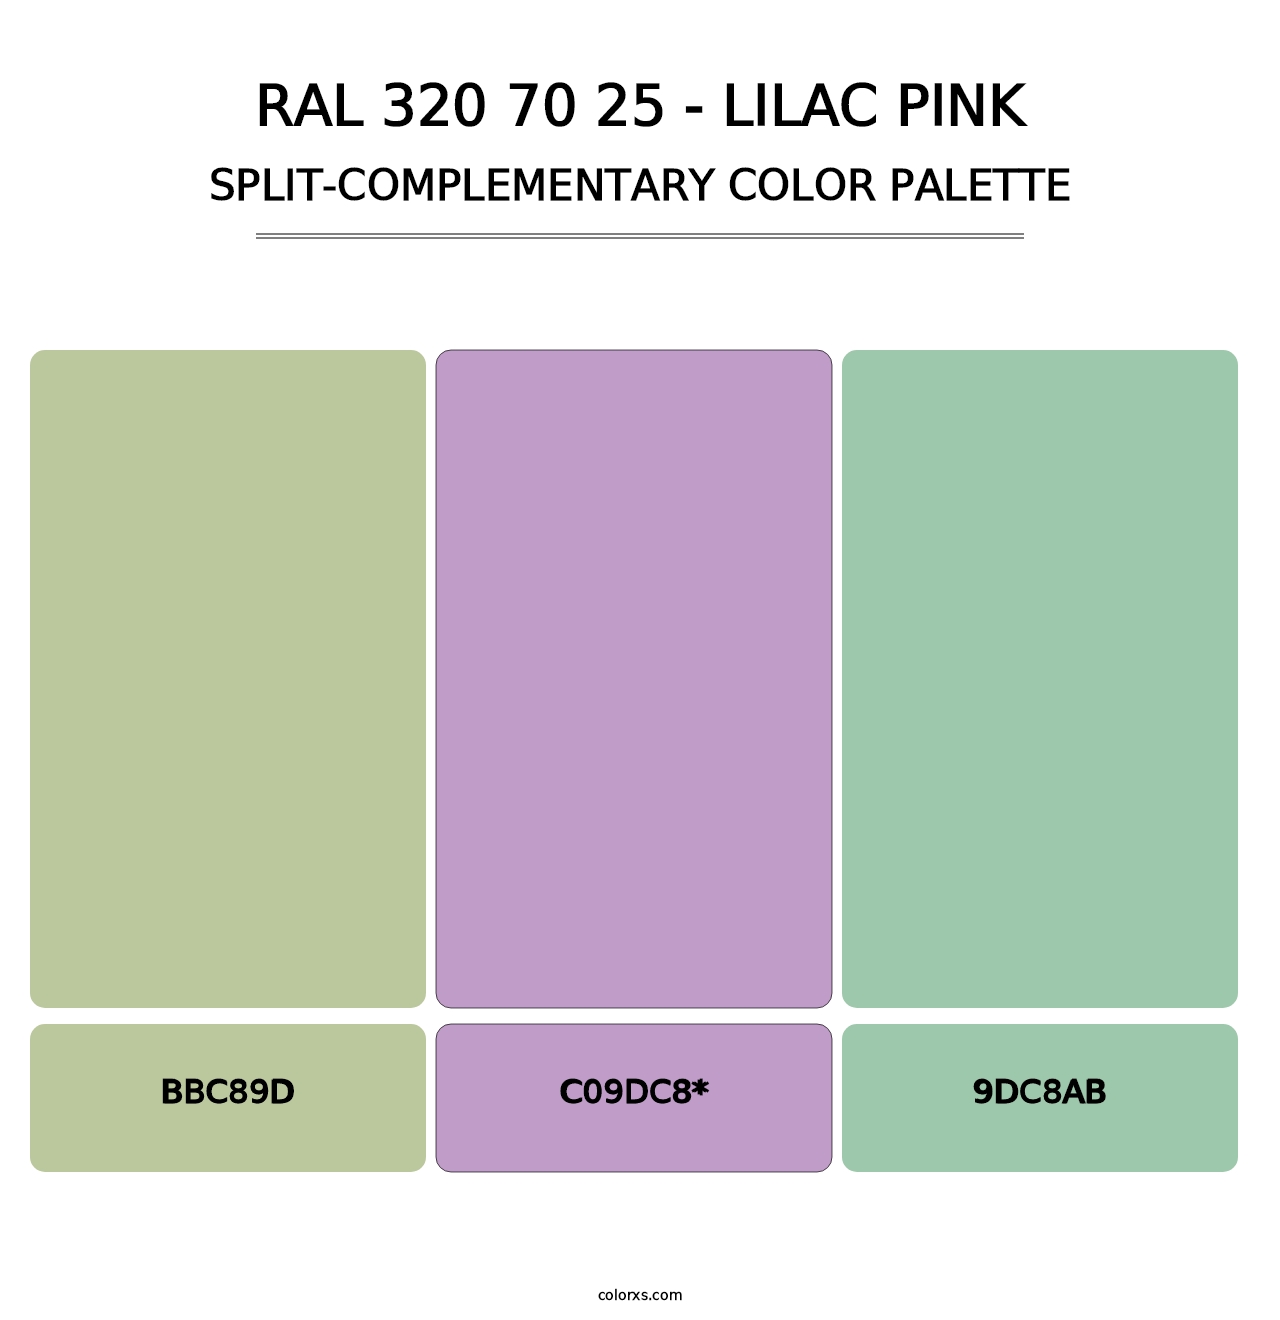 RAL 320 70 25 - Lilac Pink - Split-Complementary Color Palette